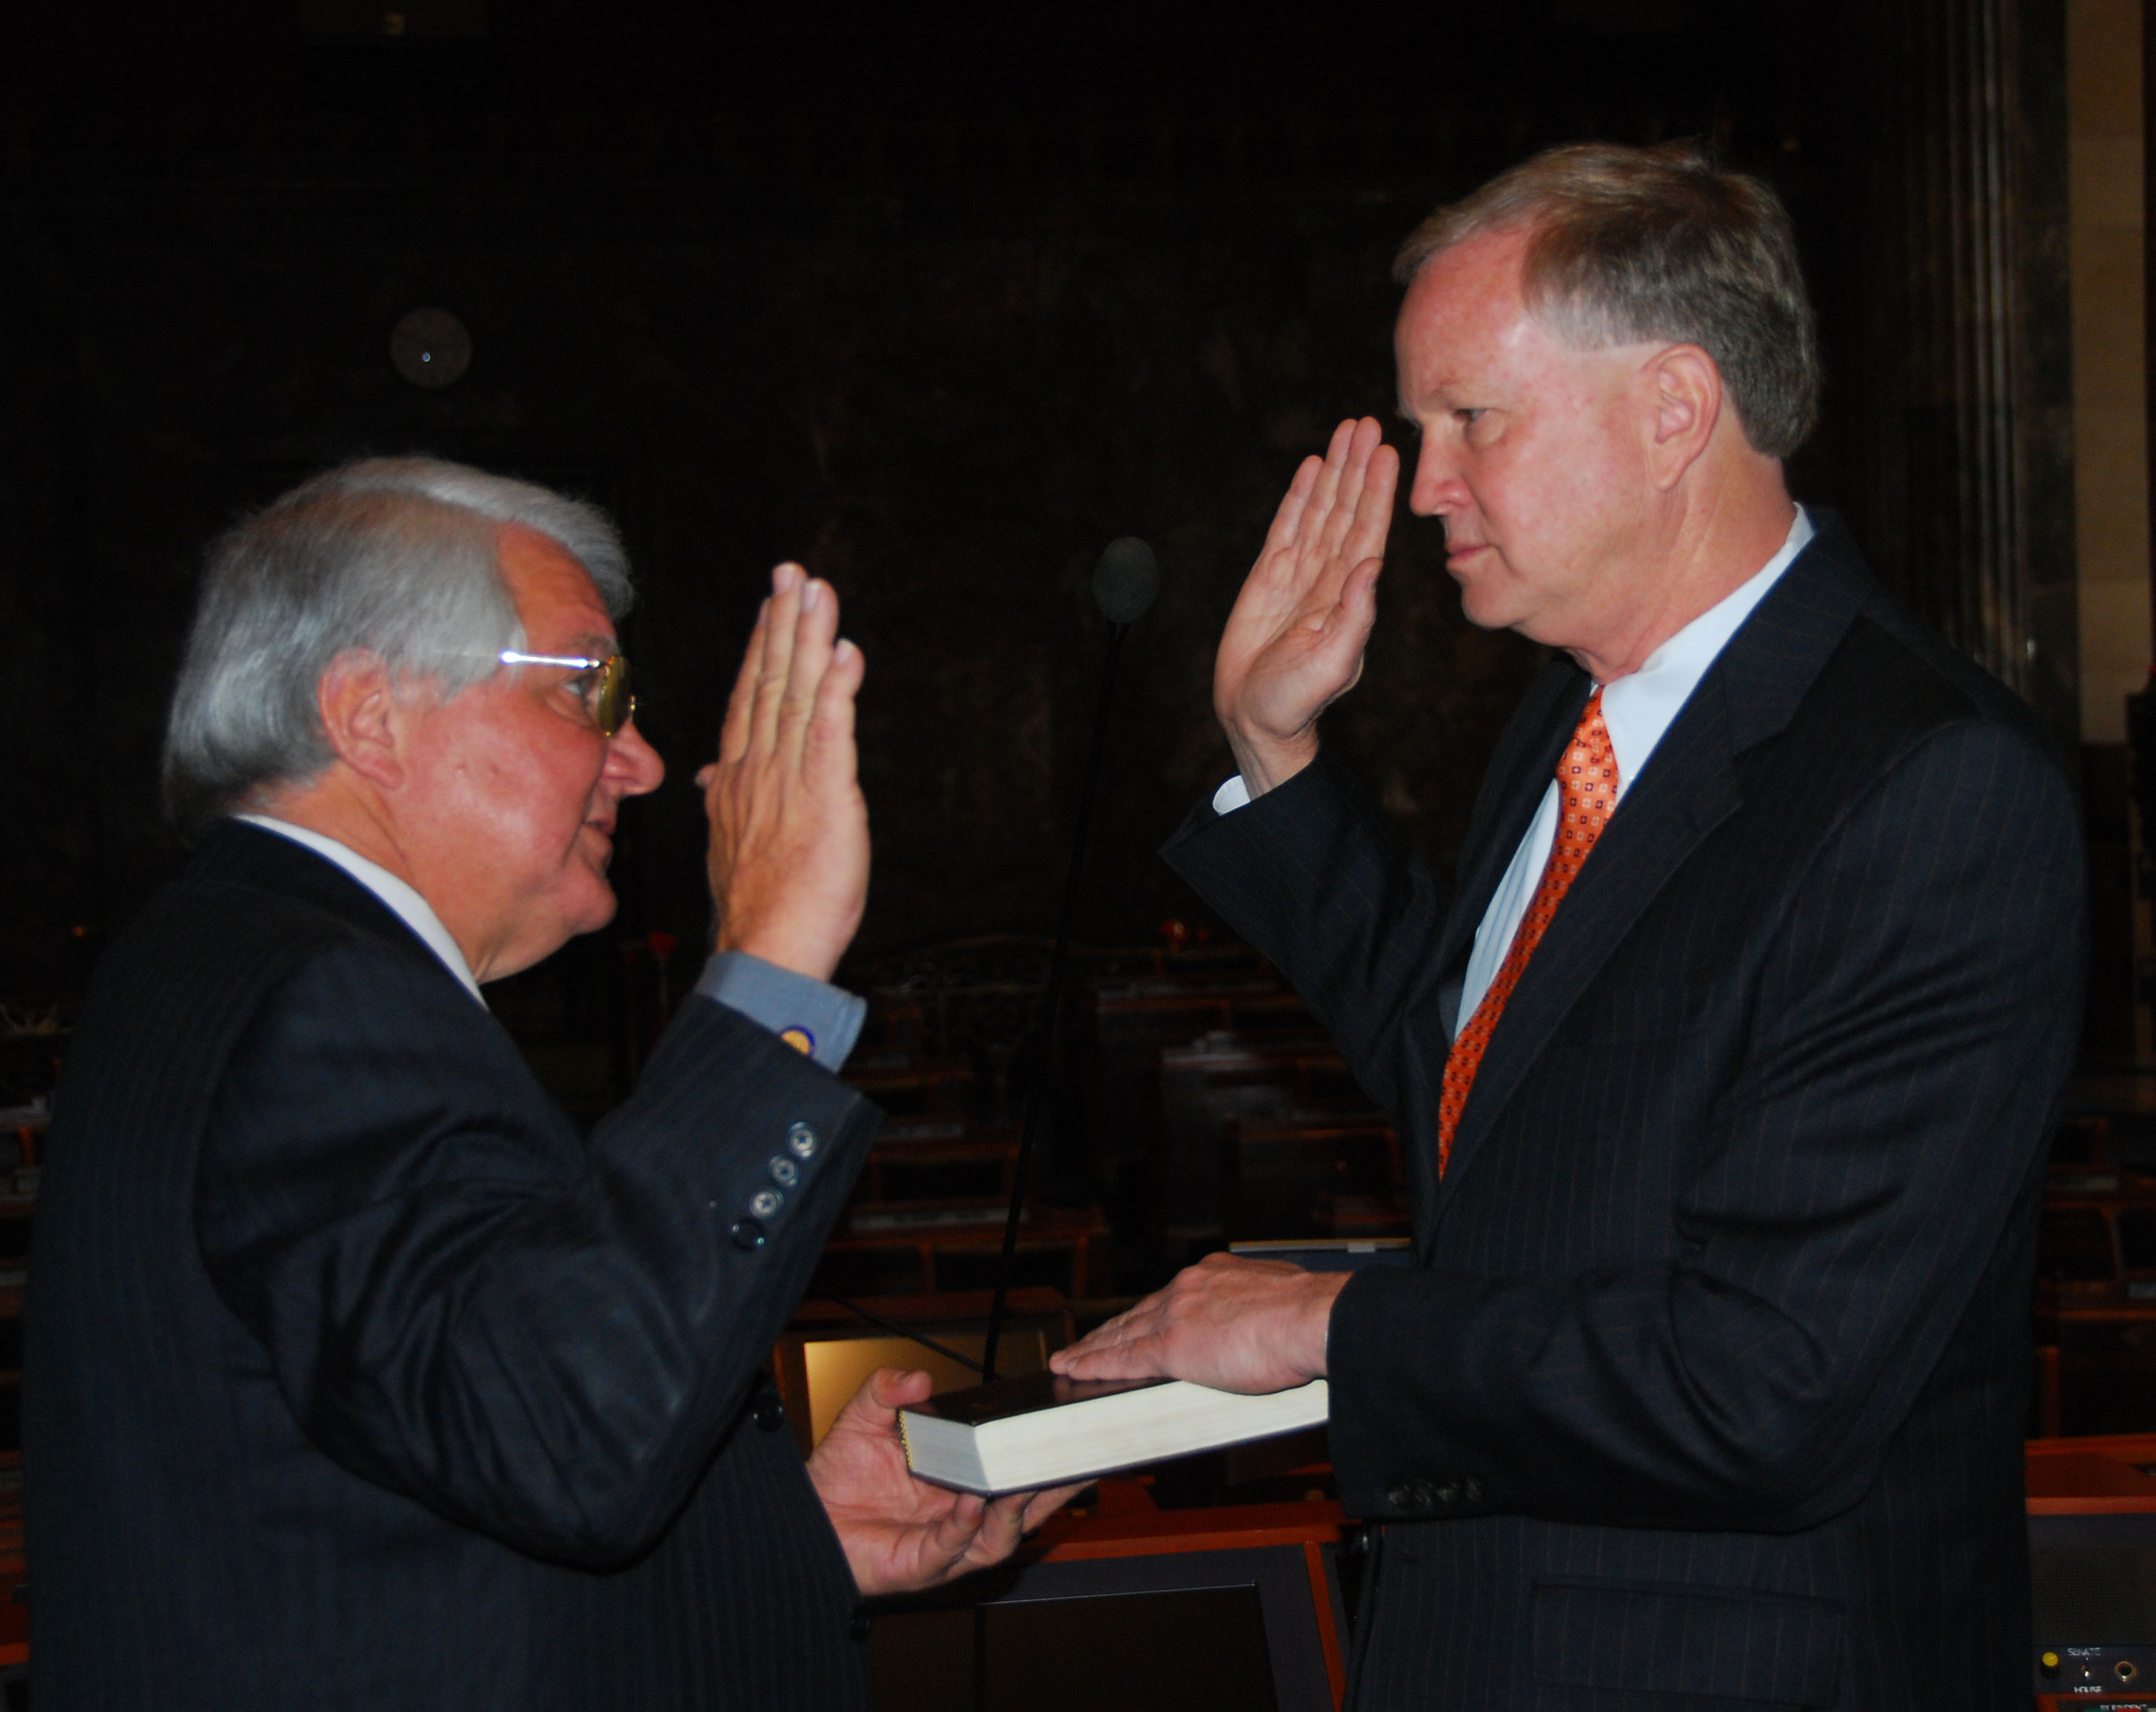 Ambassador Farere is sworn in by Father Brymstone